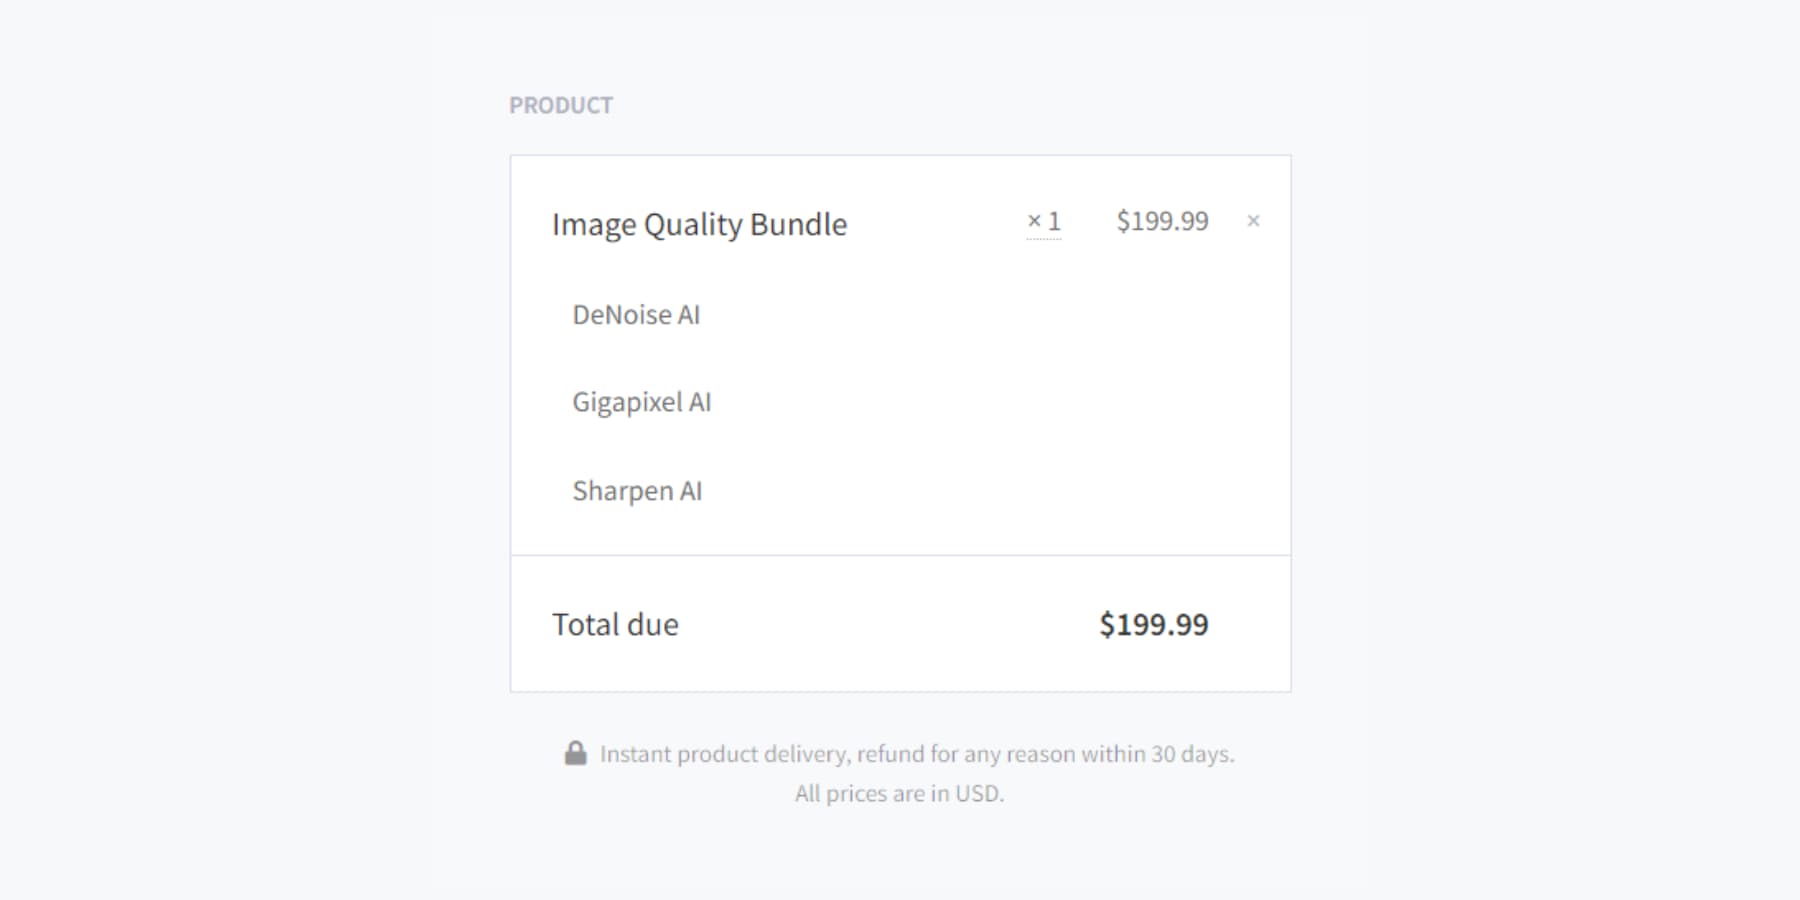 A screenshot of Gigapixel's Pricing with the Image Quality Bundle